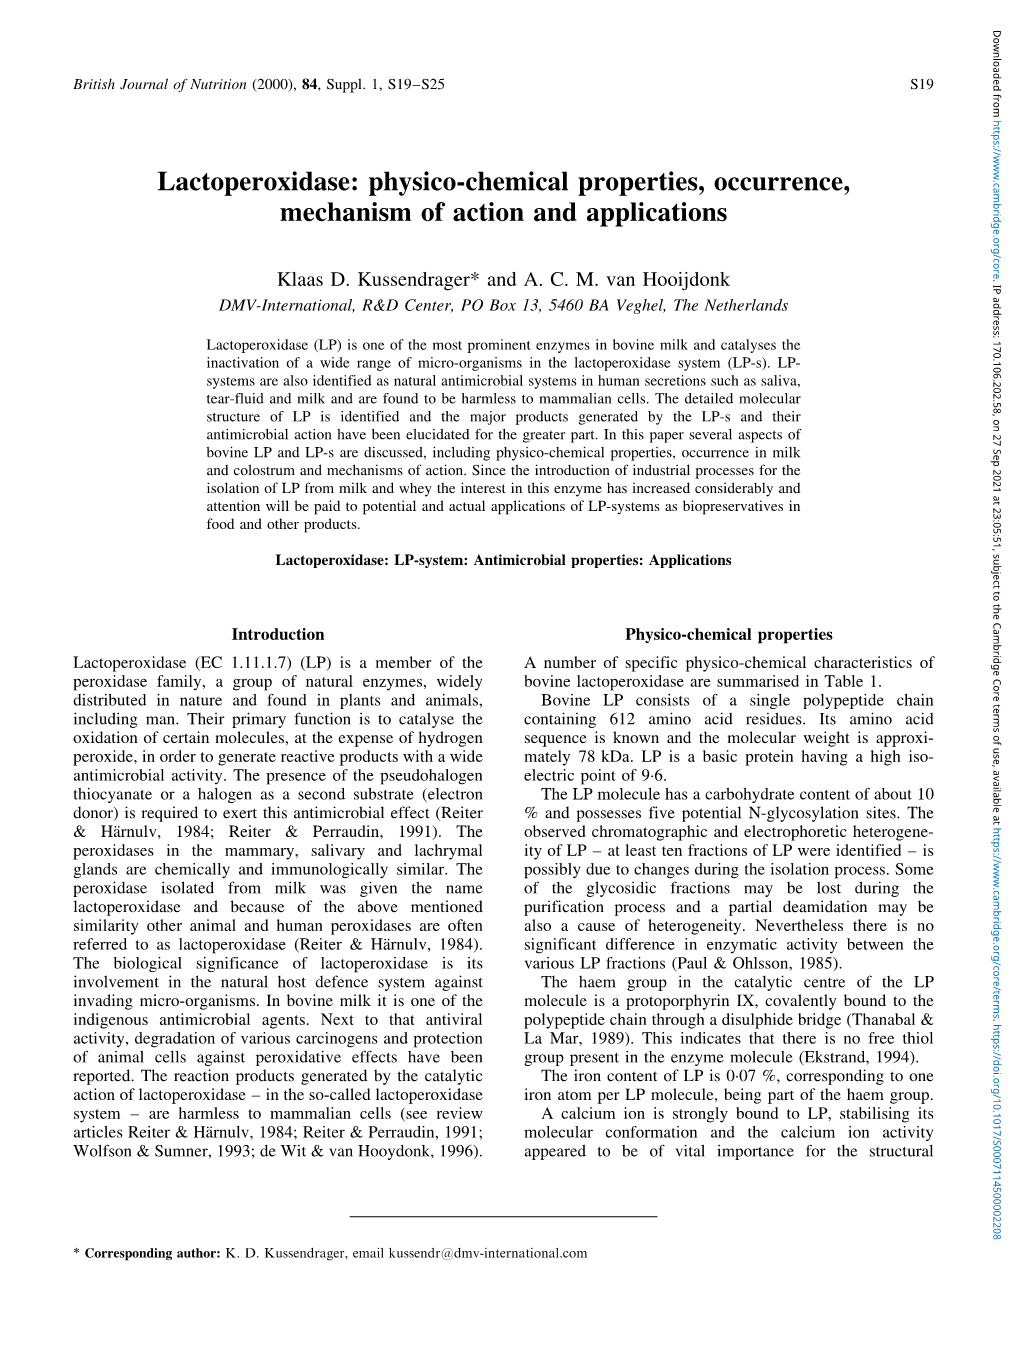 Lactoperoxidase: Physico-Chemical Properties, Occurrence, Mechanism of Action and Applications